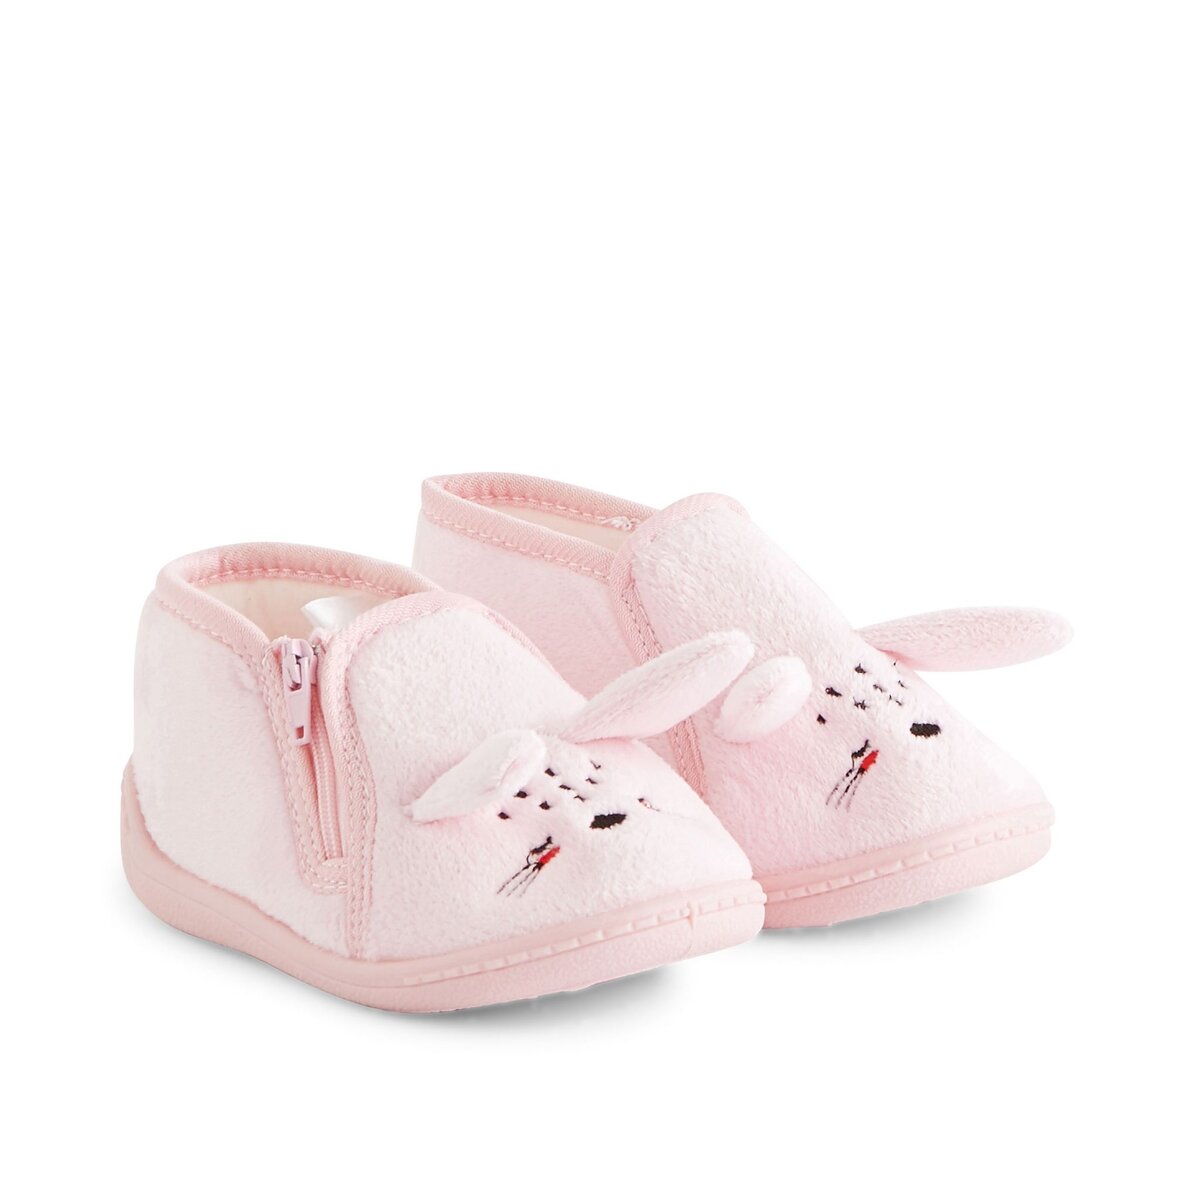 IN EXTENSO Chaussons lapin bébé fille